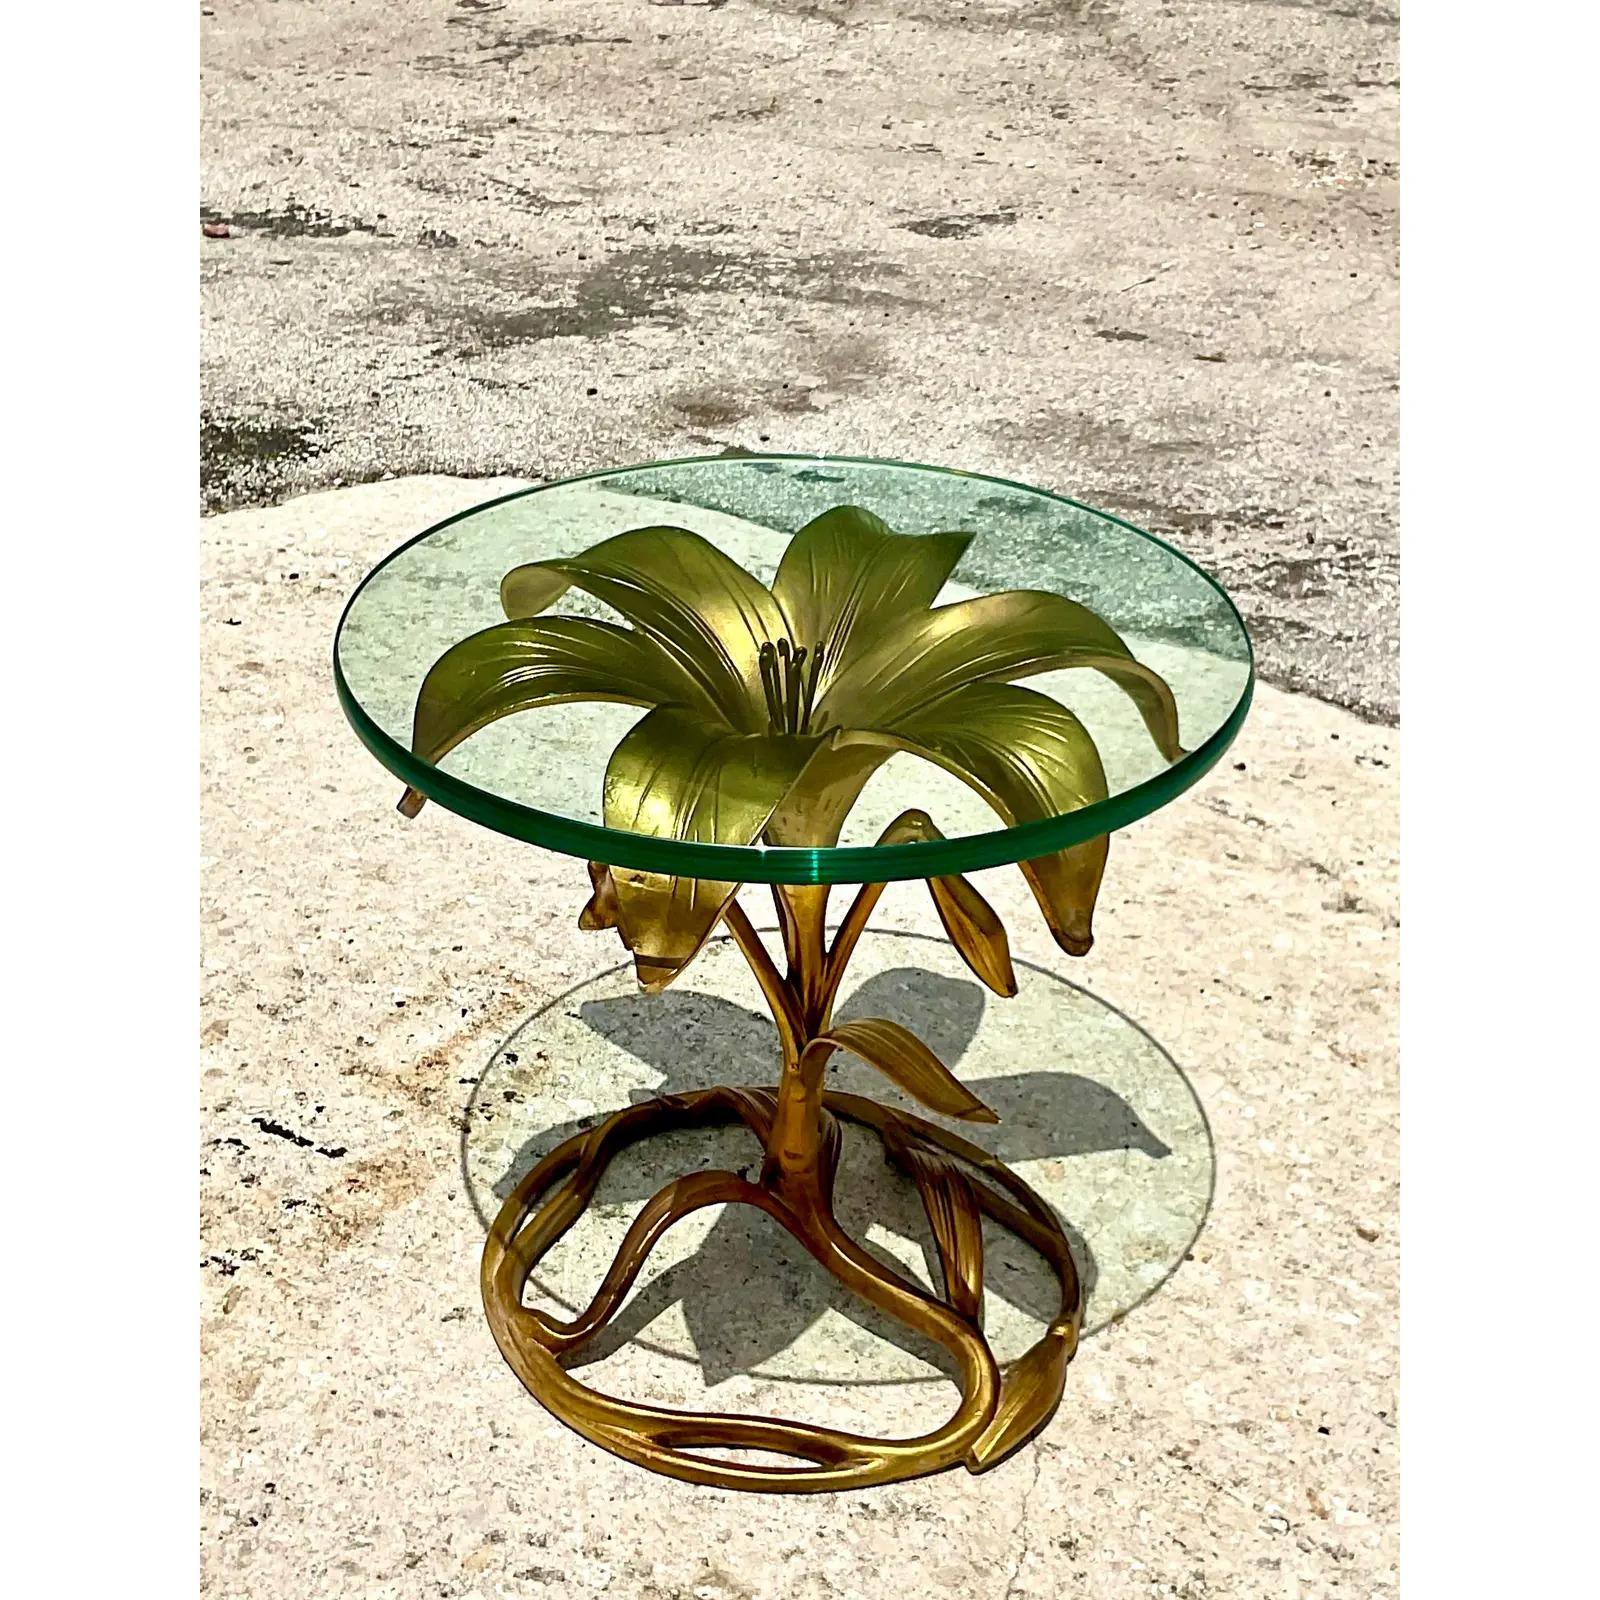 Fantastic vintage Regency side table. Beautiful gilt finish on the iconic large lily design. Thick glass top. Add a little drama to any space. Acquired from a Palm Beach estate.